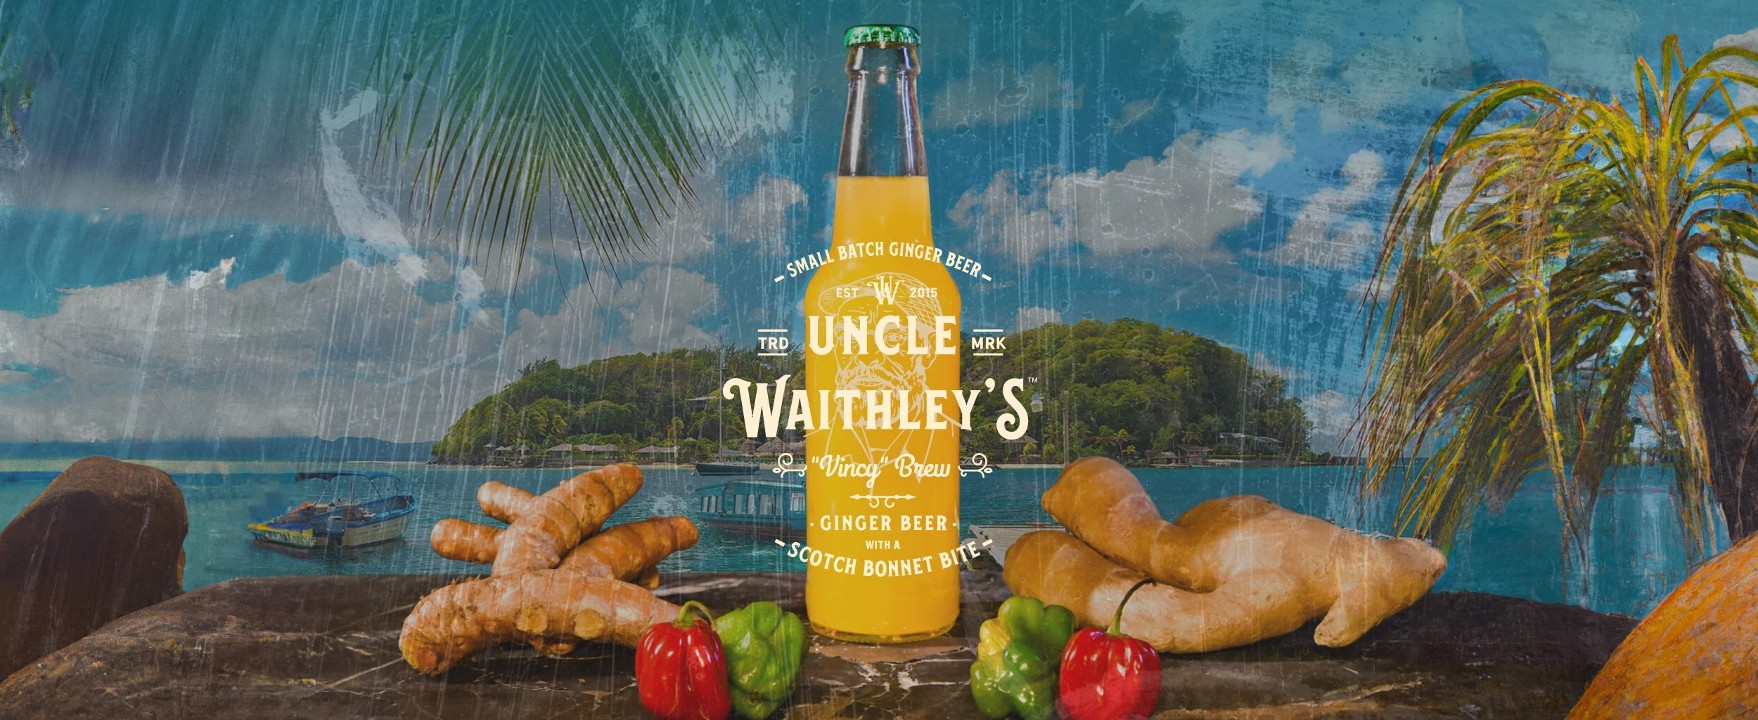 Uncle Waithley’s  Ginger Beer